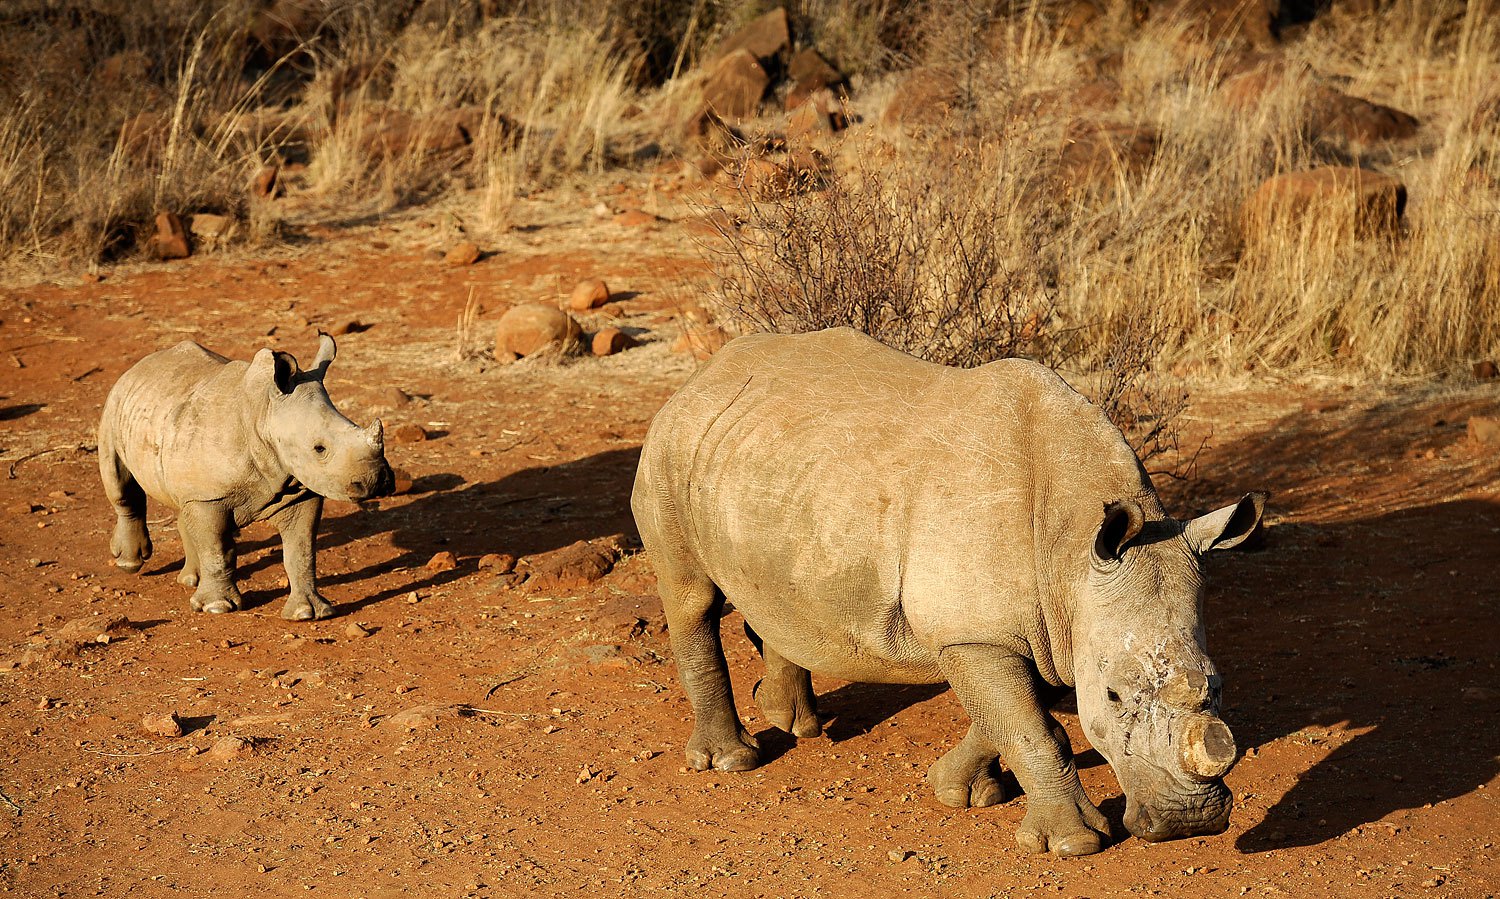 A black dehorned rhinoceros is followed by a calf on August 3, 2012 at the Bona Bona Game Reserve, southeast of Johannesburg, South Africa. The western black rhino subspecies (not pictured) has now been officially declared extinct.